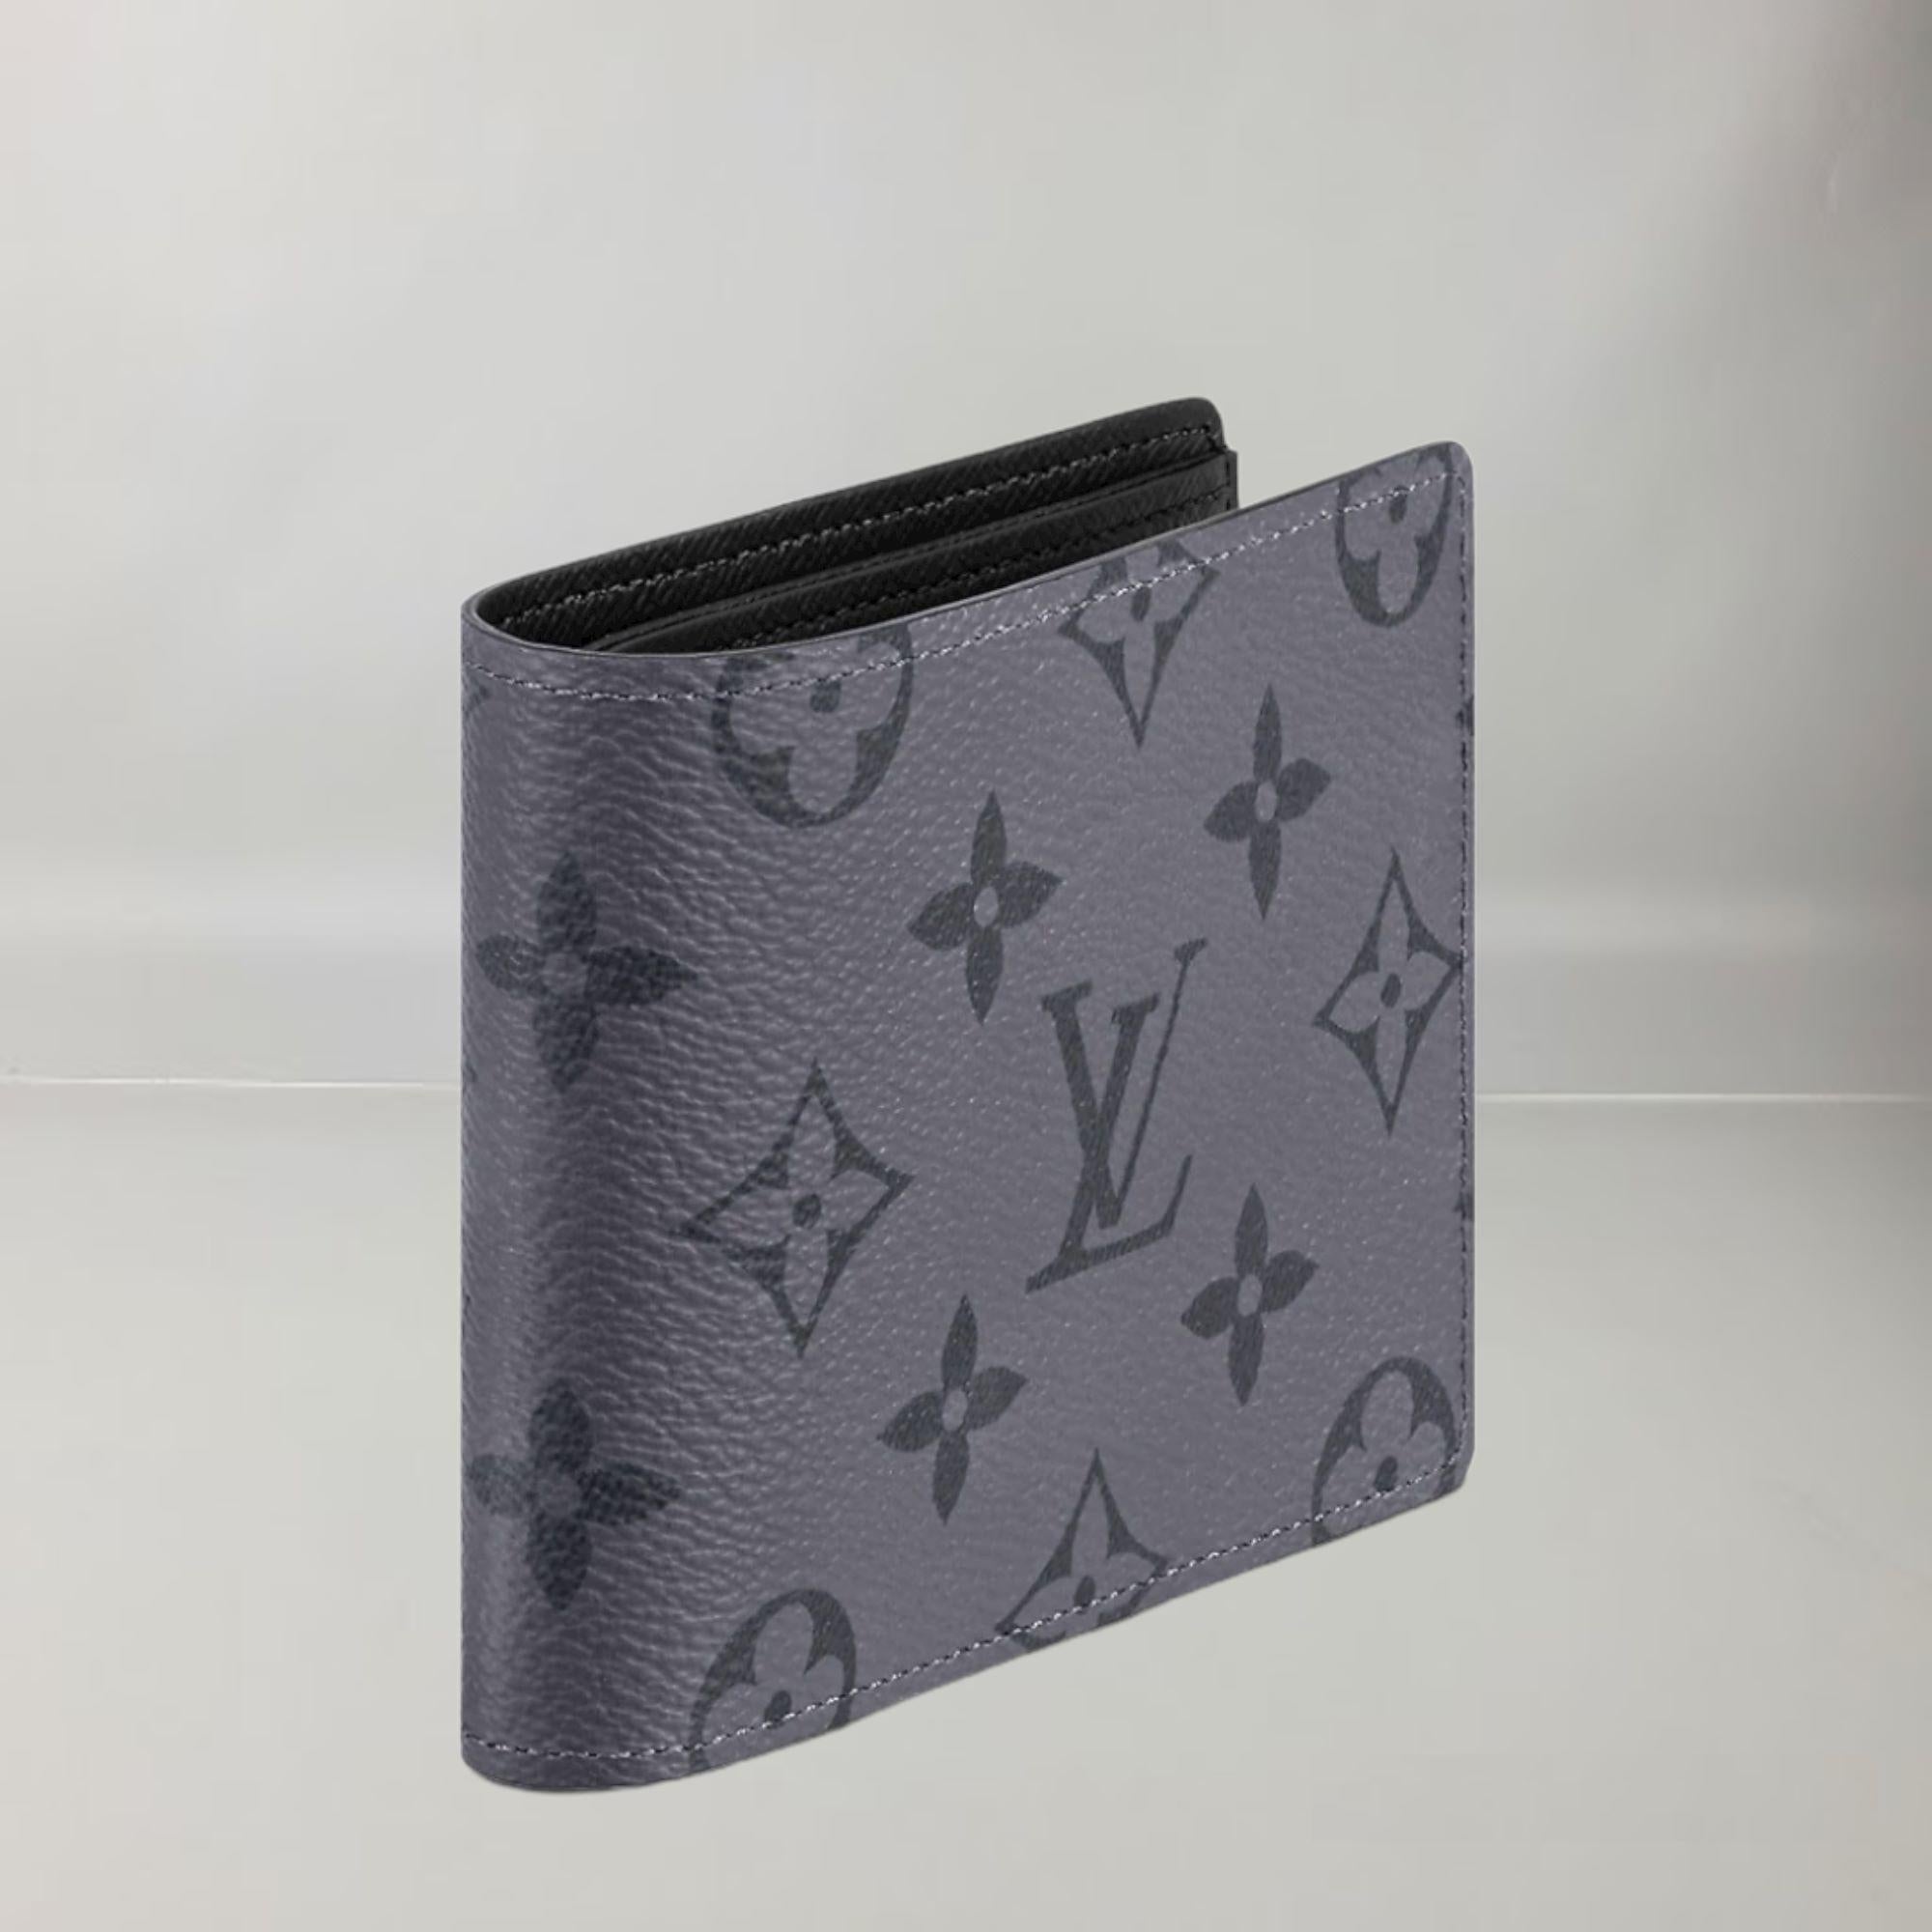 Allying form with function, the practical Slender Wallet is fashioned from Monogram Eclipse Reverse canvas with a grained leather lining. This sleek wallet slips easily into almost any pocket or bag and features numerous card slots as well as a